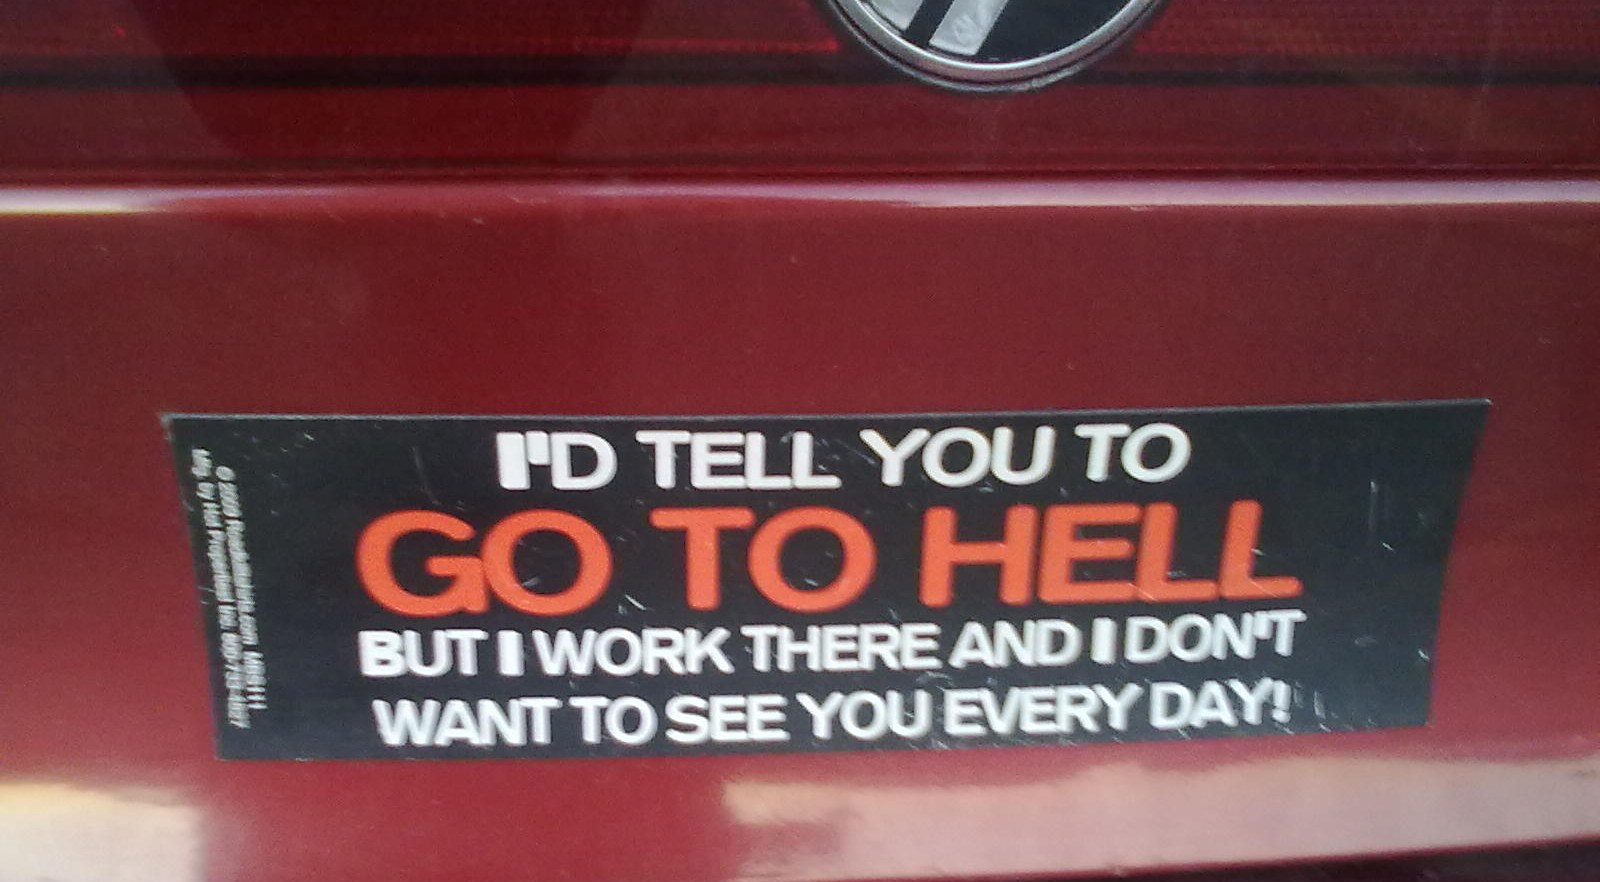 funny bumper sticker quotes - I'D Tell You To Go To Hell But I Work There And I Dont Want To See You Every Day!